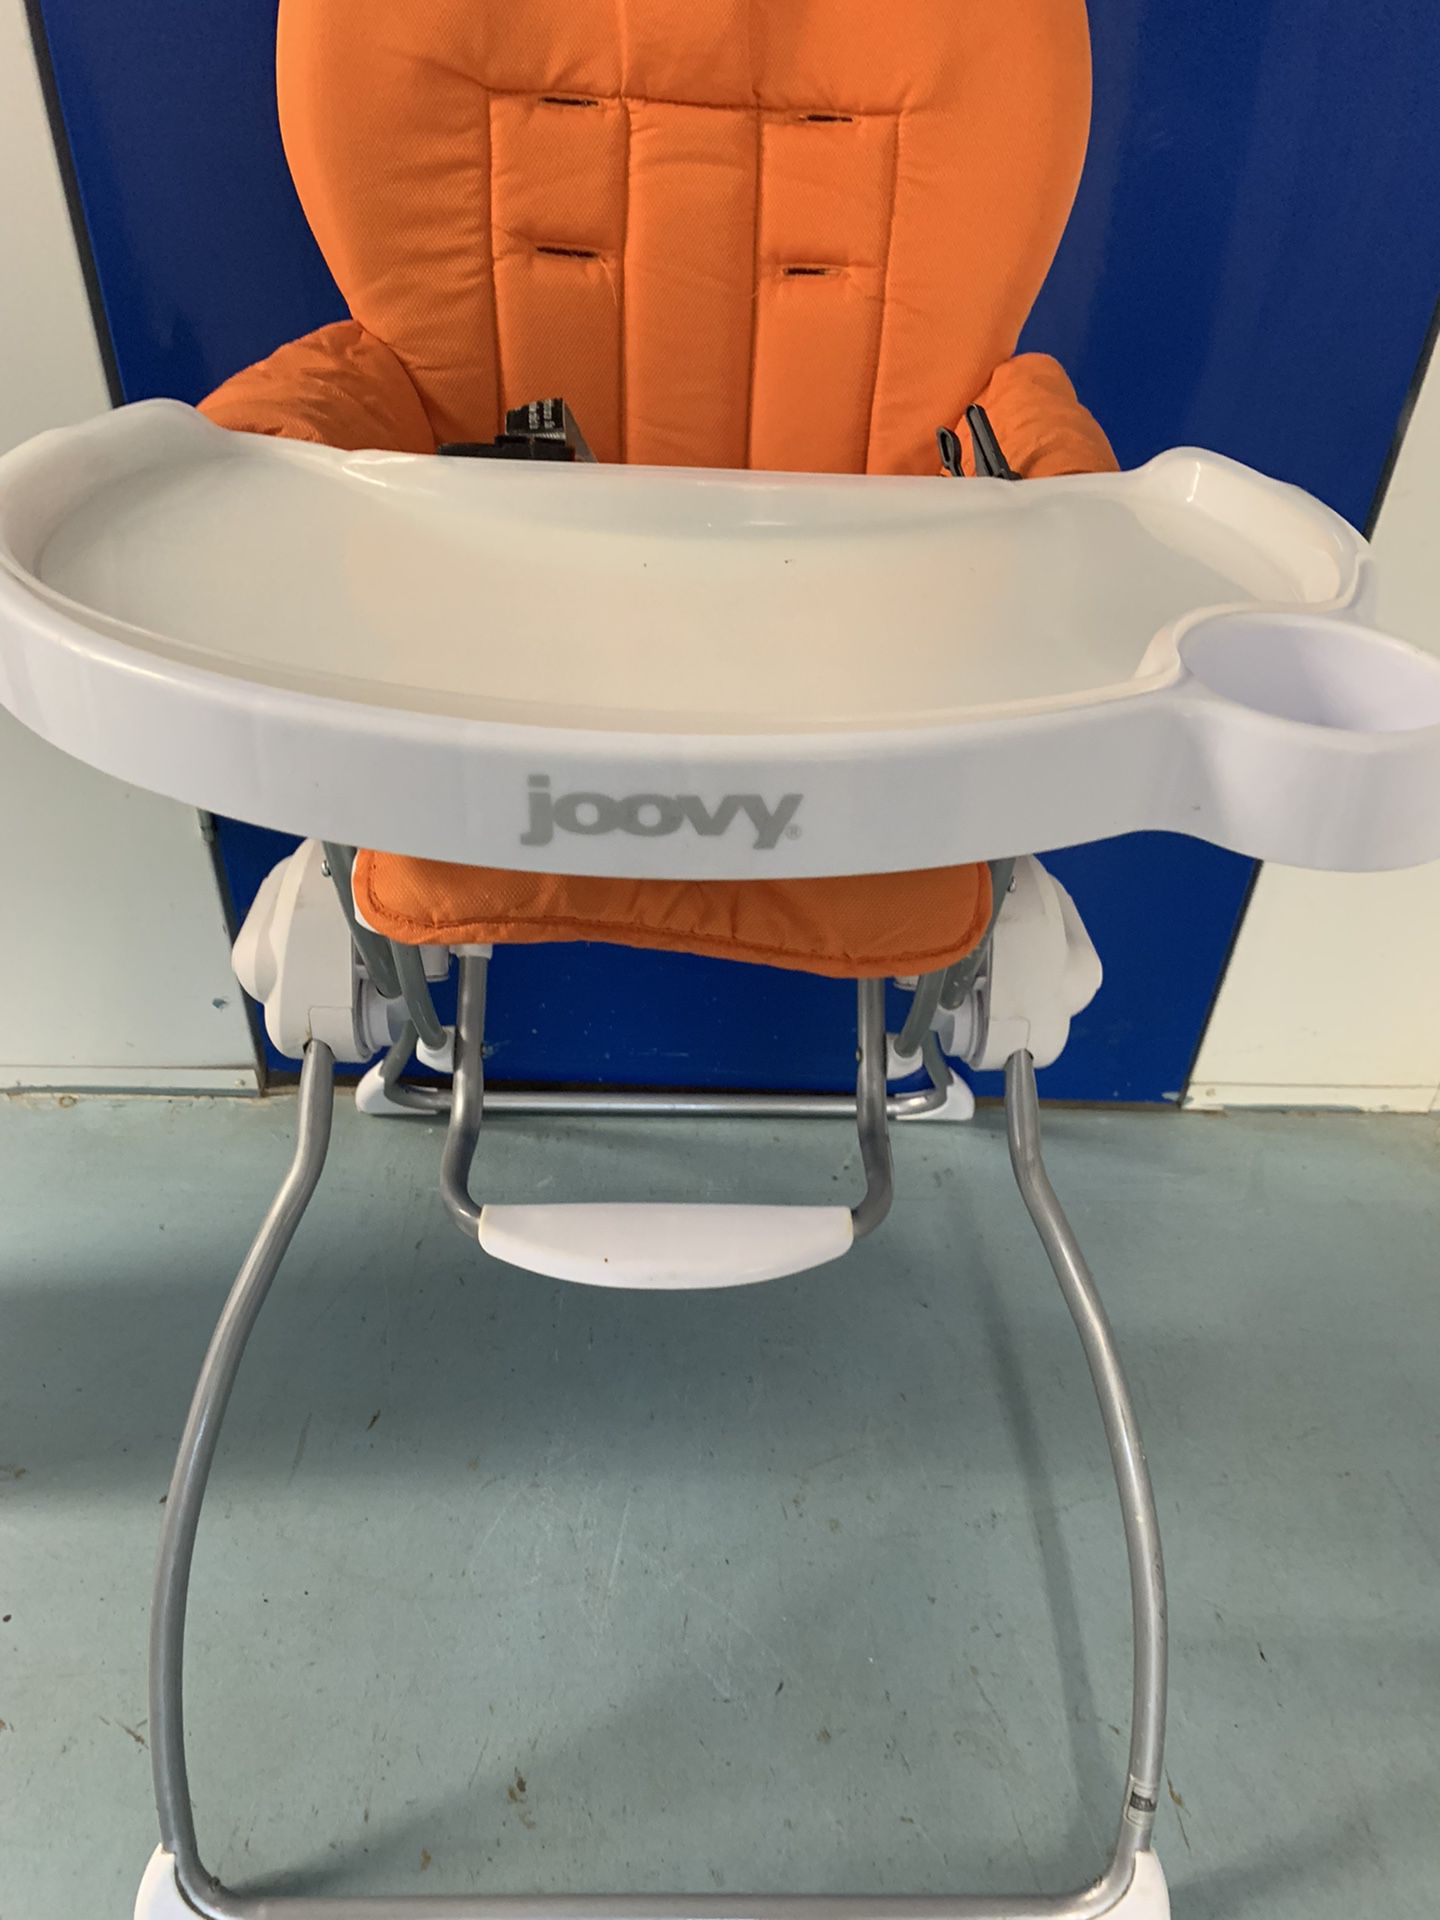 Joovy Nook Compact Fold Swing Open Tray High Chair  